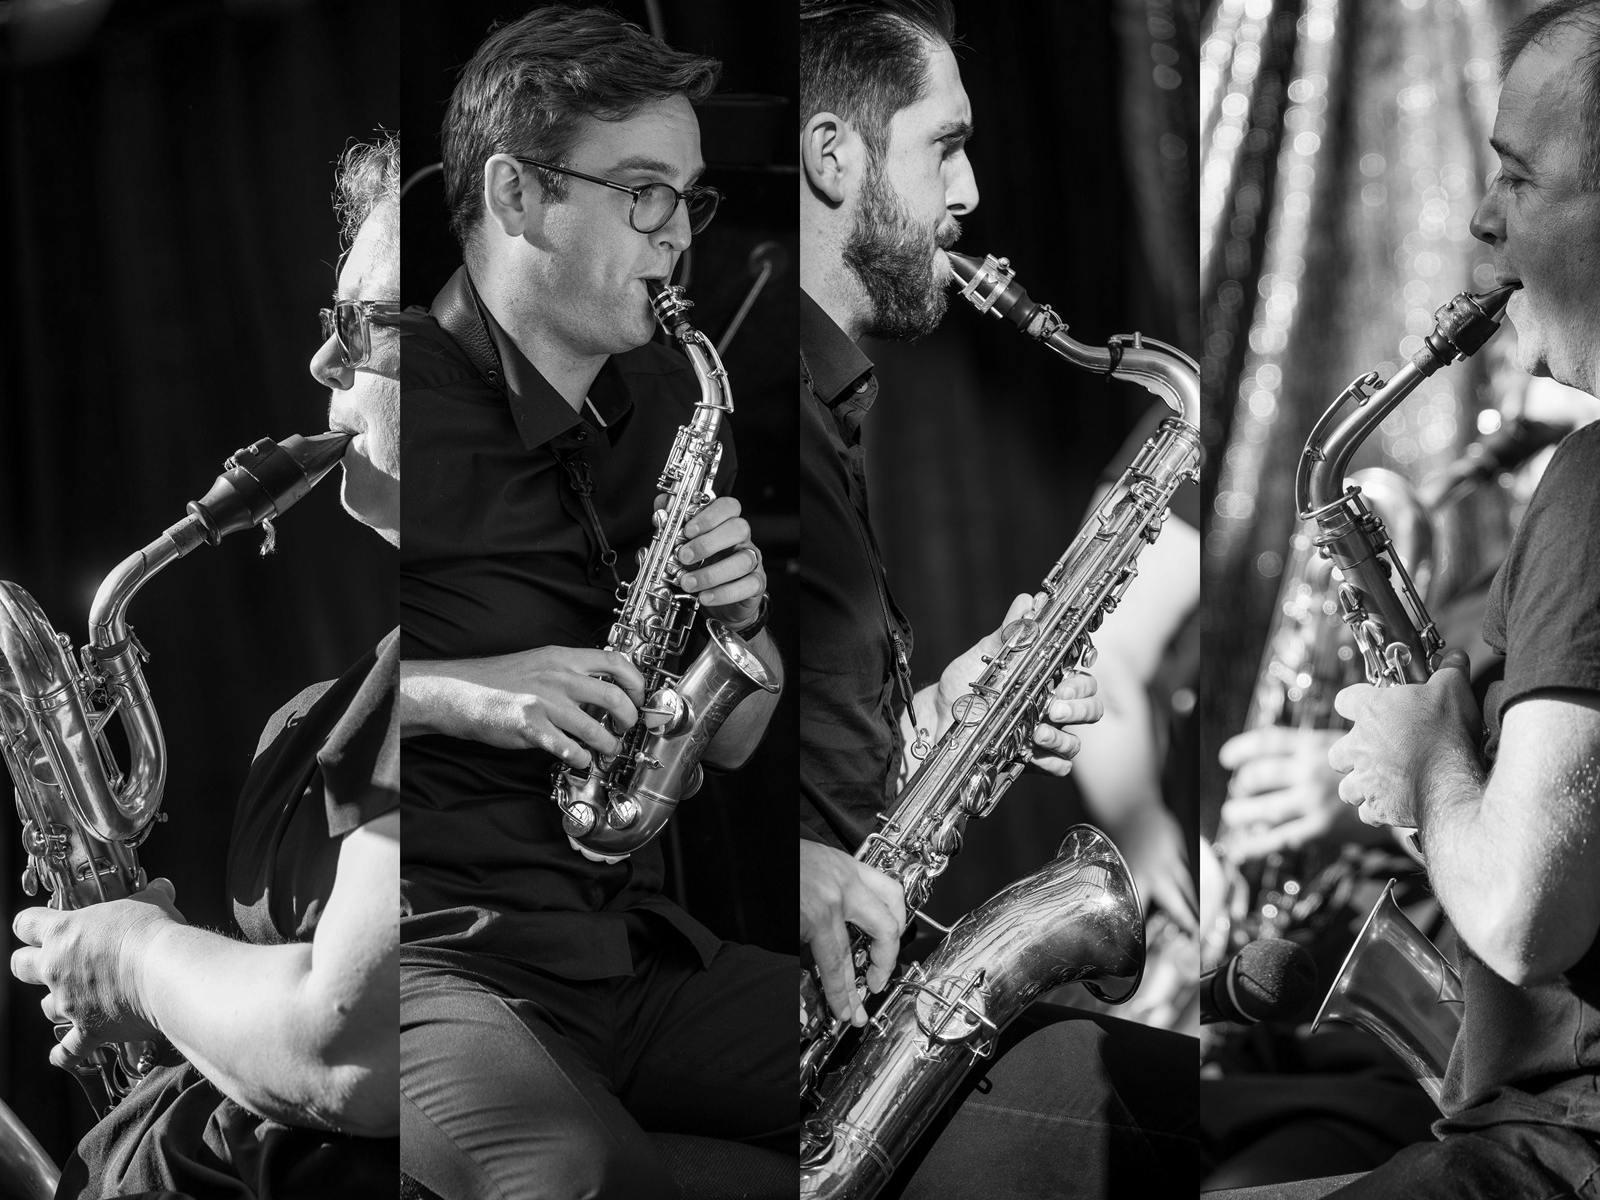 A composition of four black and white photos of saxaphone players